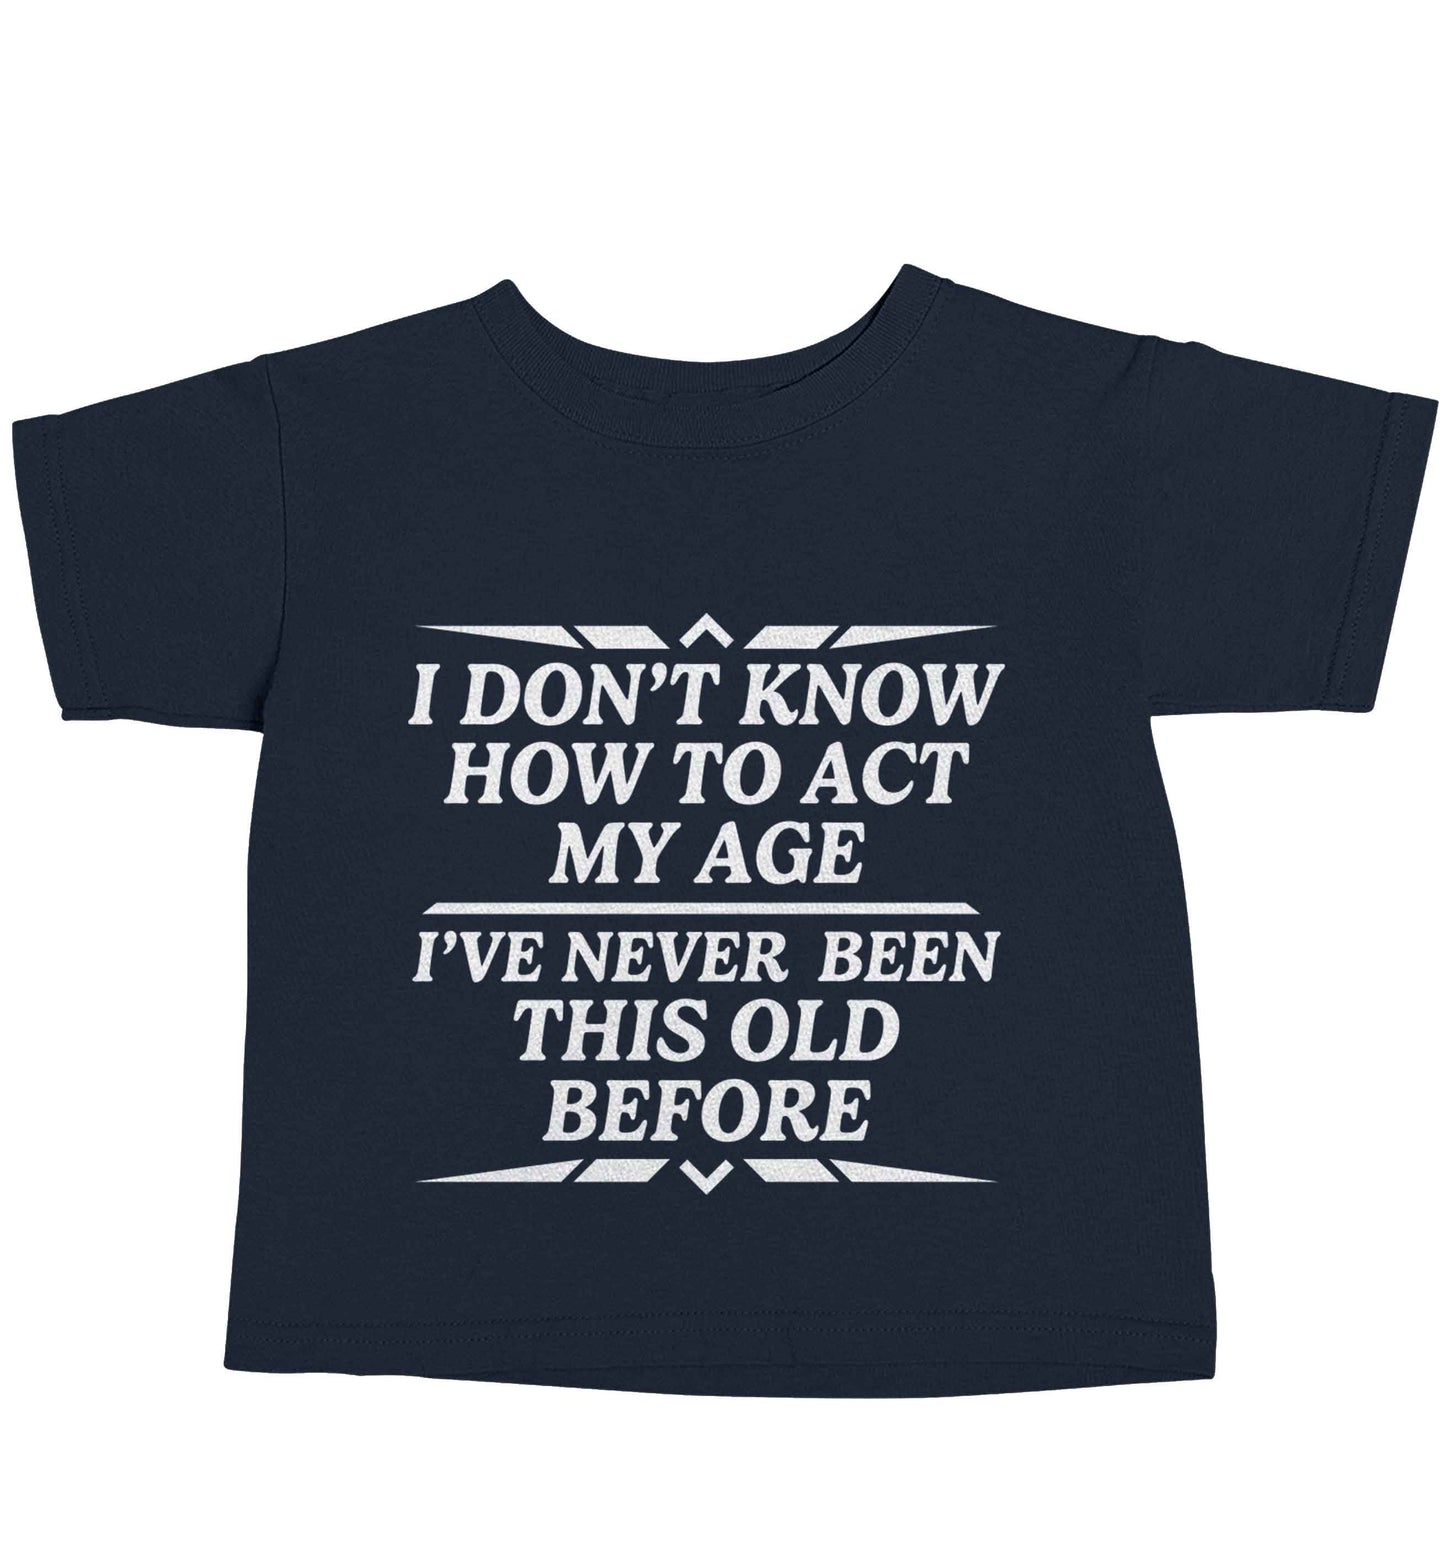 I don't know how to act my age I've never been this old before navy baby toddler Tshirt 2 Years